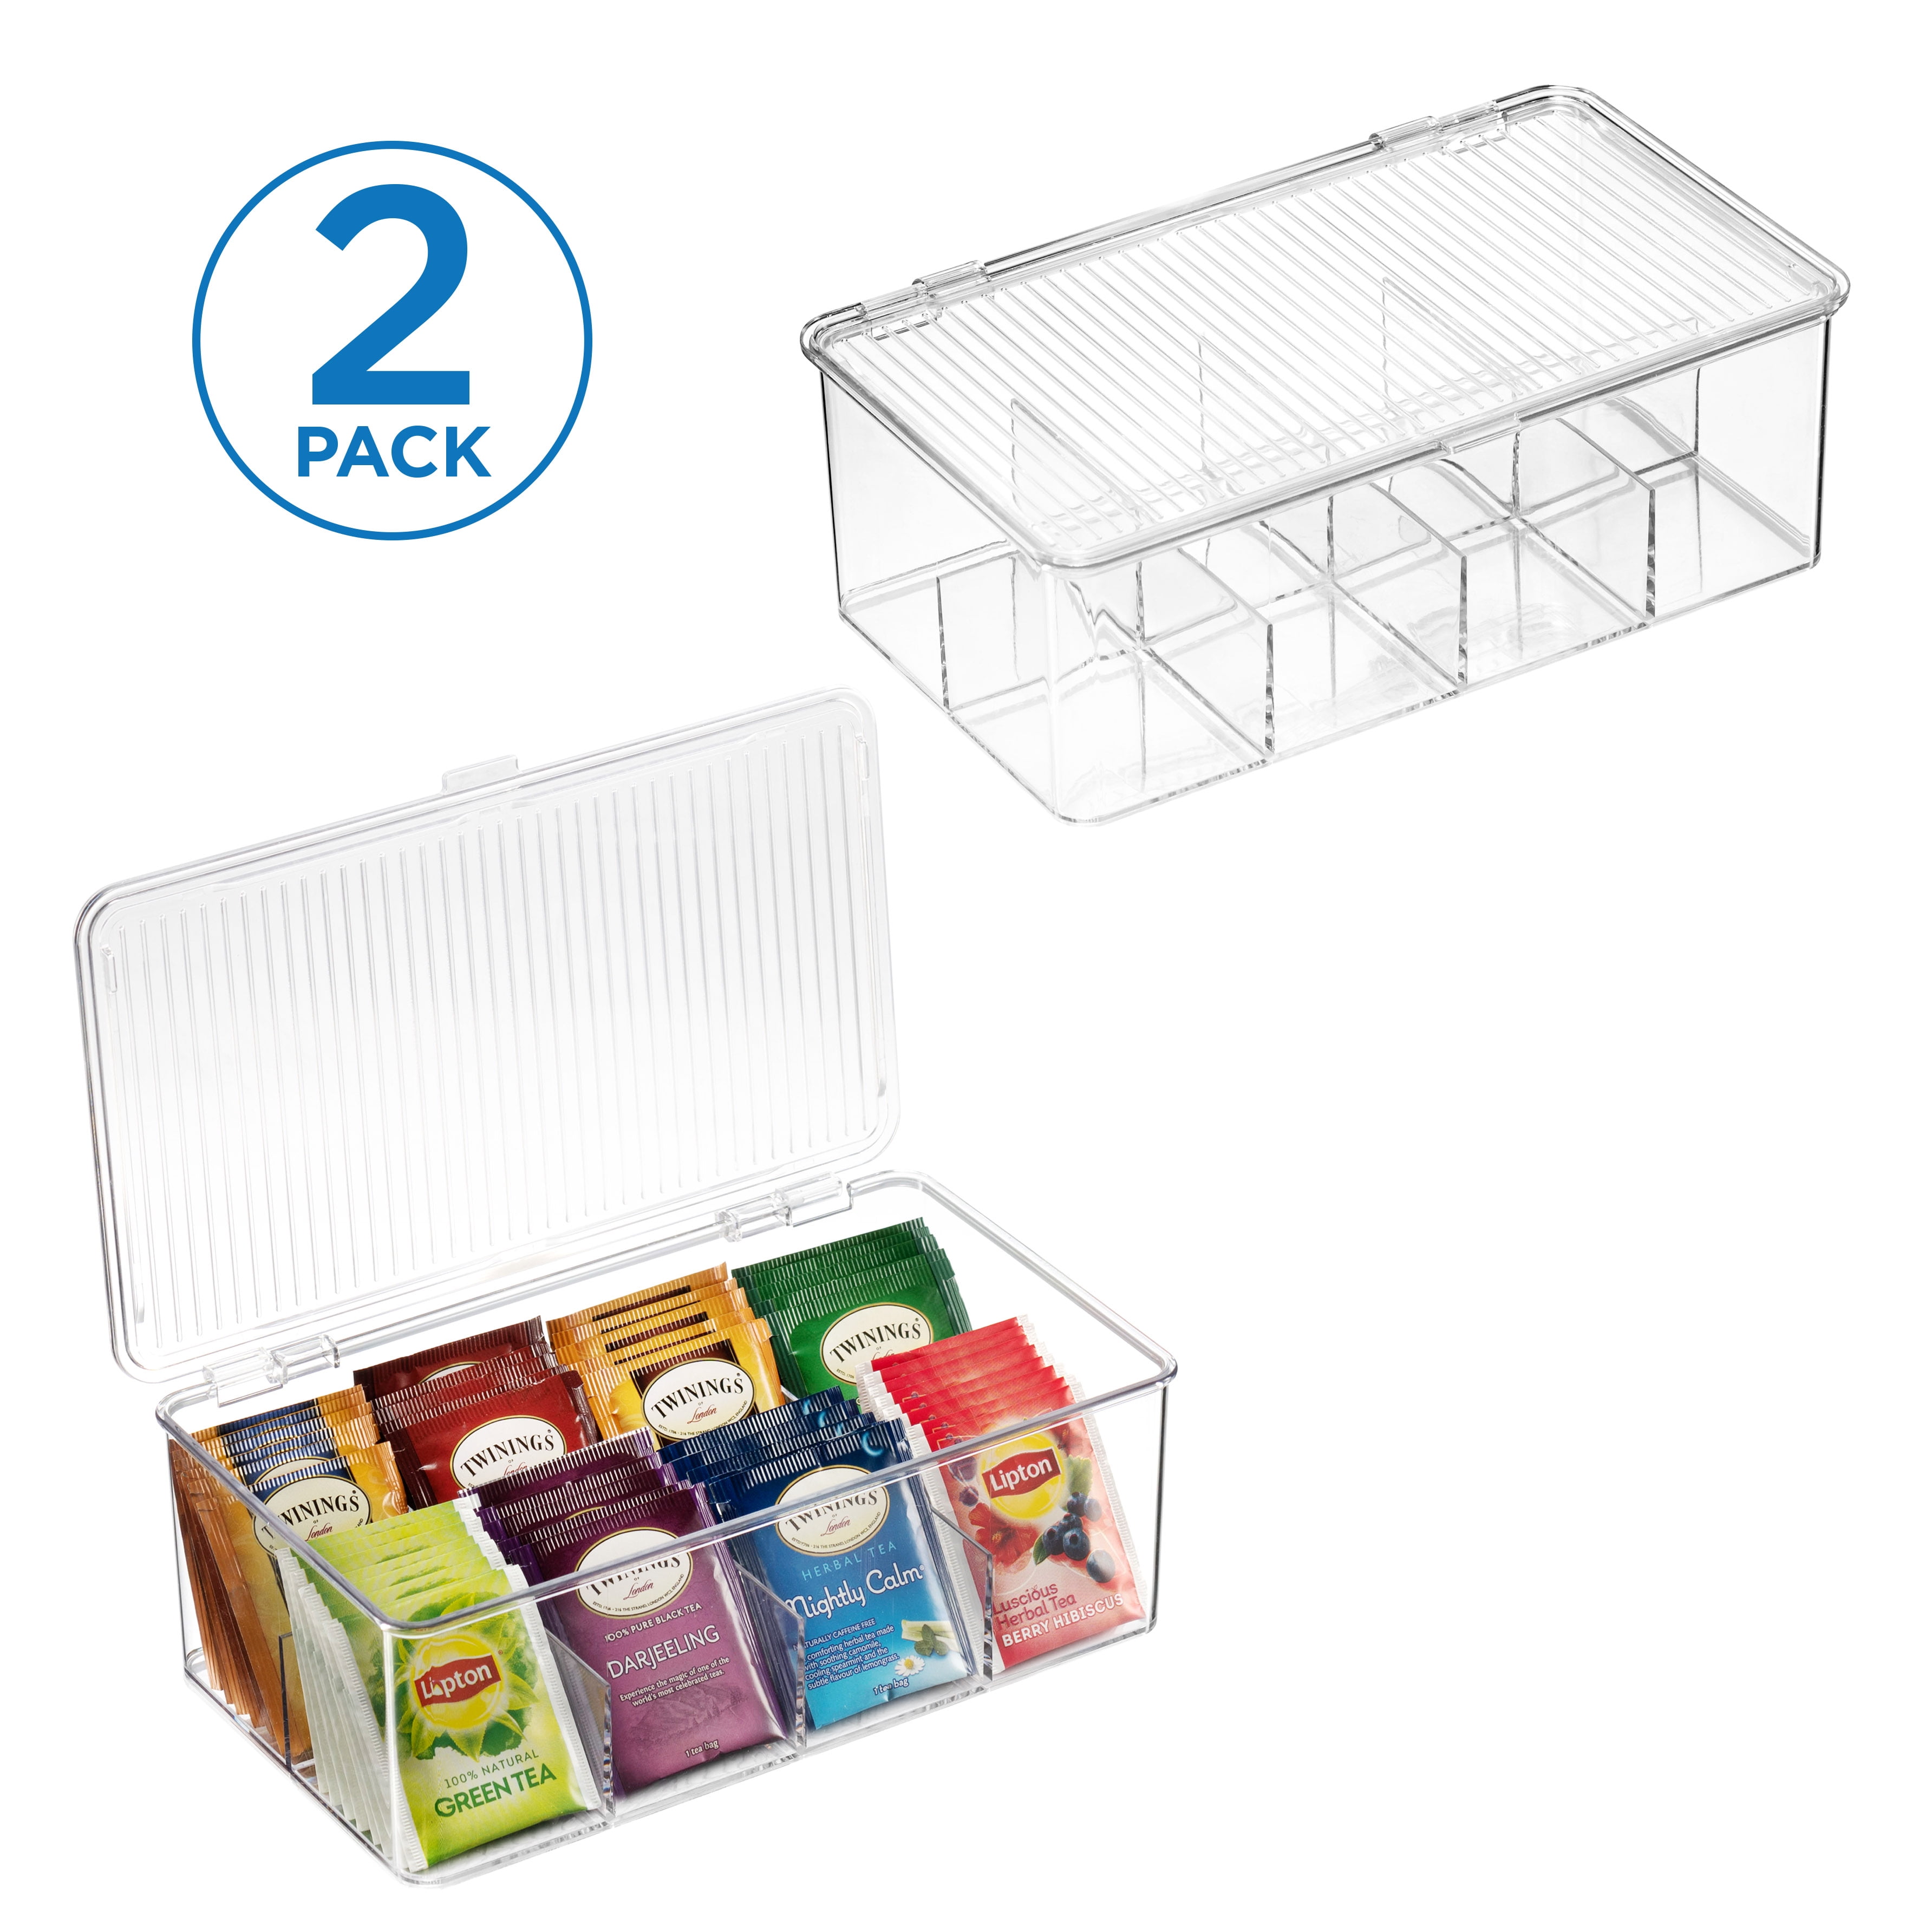 2 Pack Mini Plastic Food Packet Organizer Caddy for Fridge or Freezer-  Hanging Storage for Kitchen, Pantry, Cabinet - Tea Bag, Spice Pouches,  Dressing Mixes, Taco Seasoning - Clear 